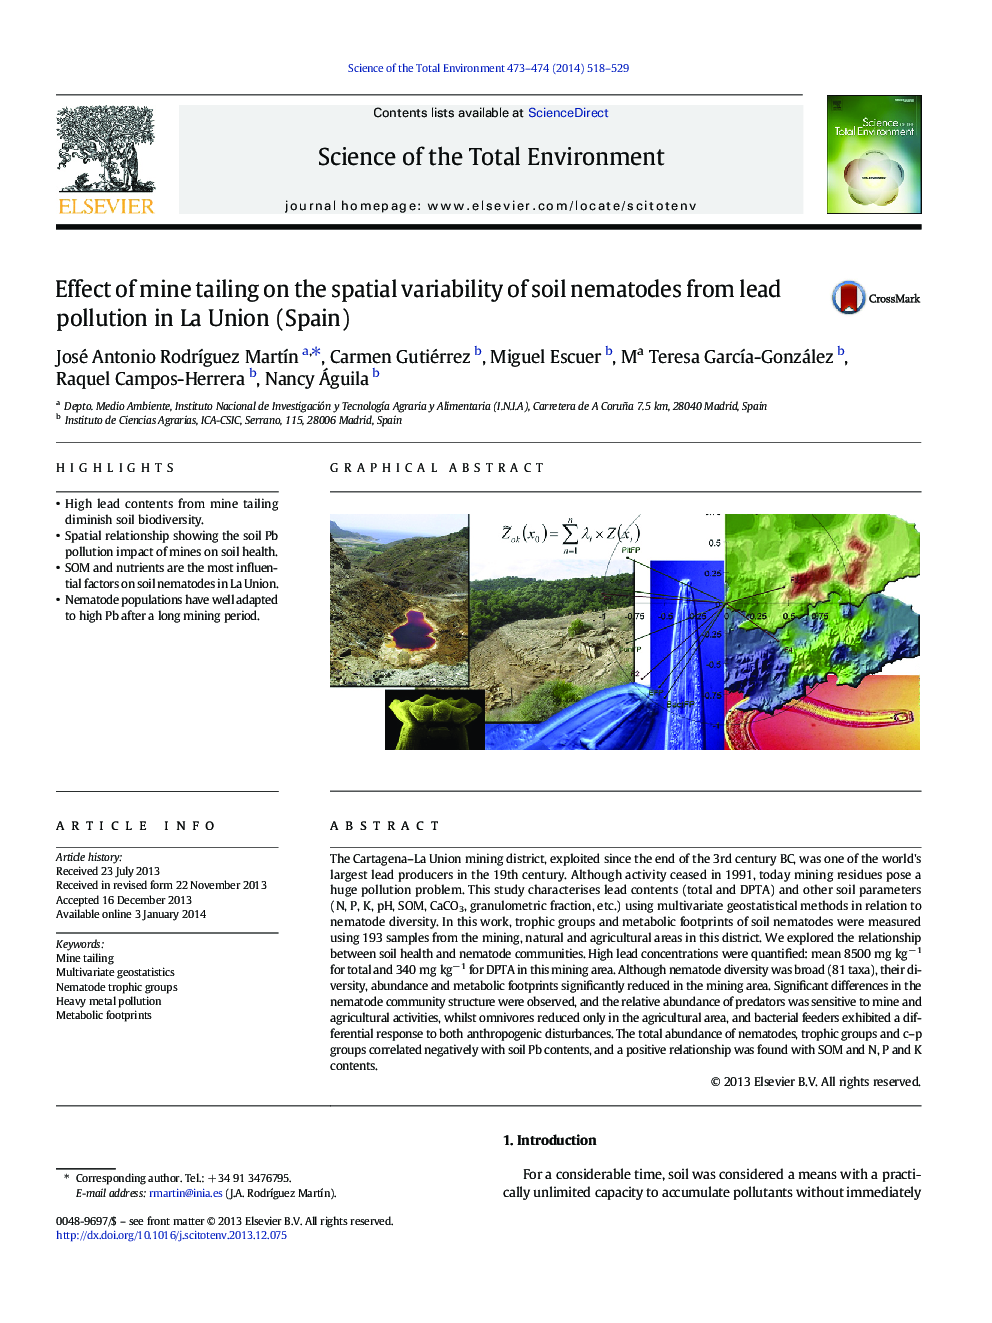 Effect of mine tailing on the spatial variability of soil nematodes from lead pollution in La Union (Spain)